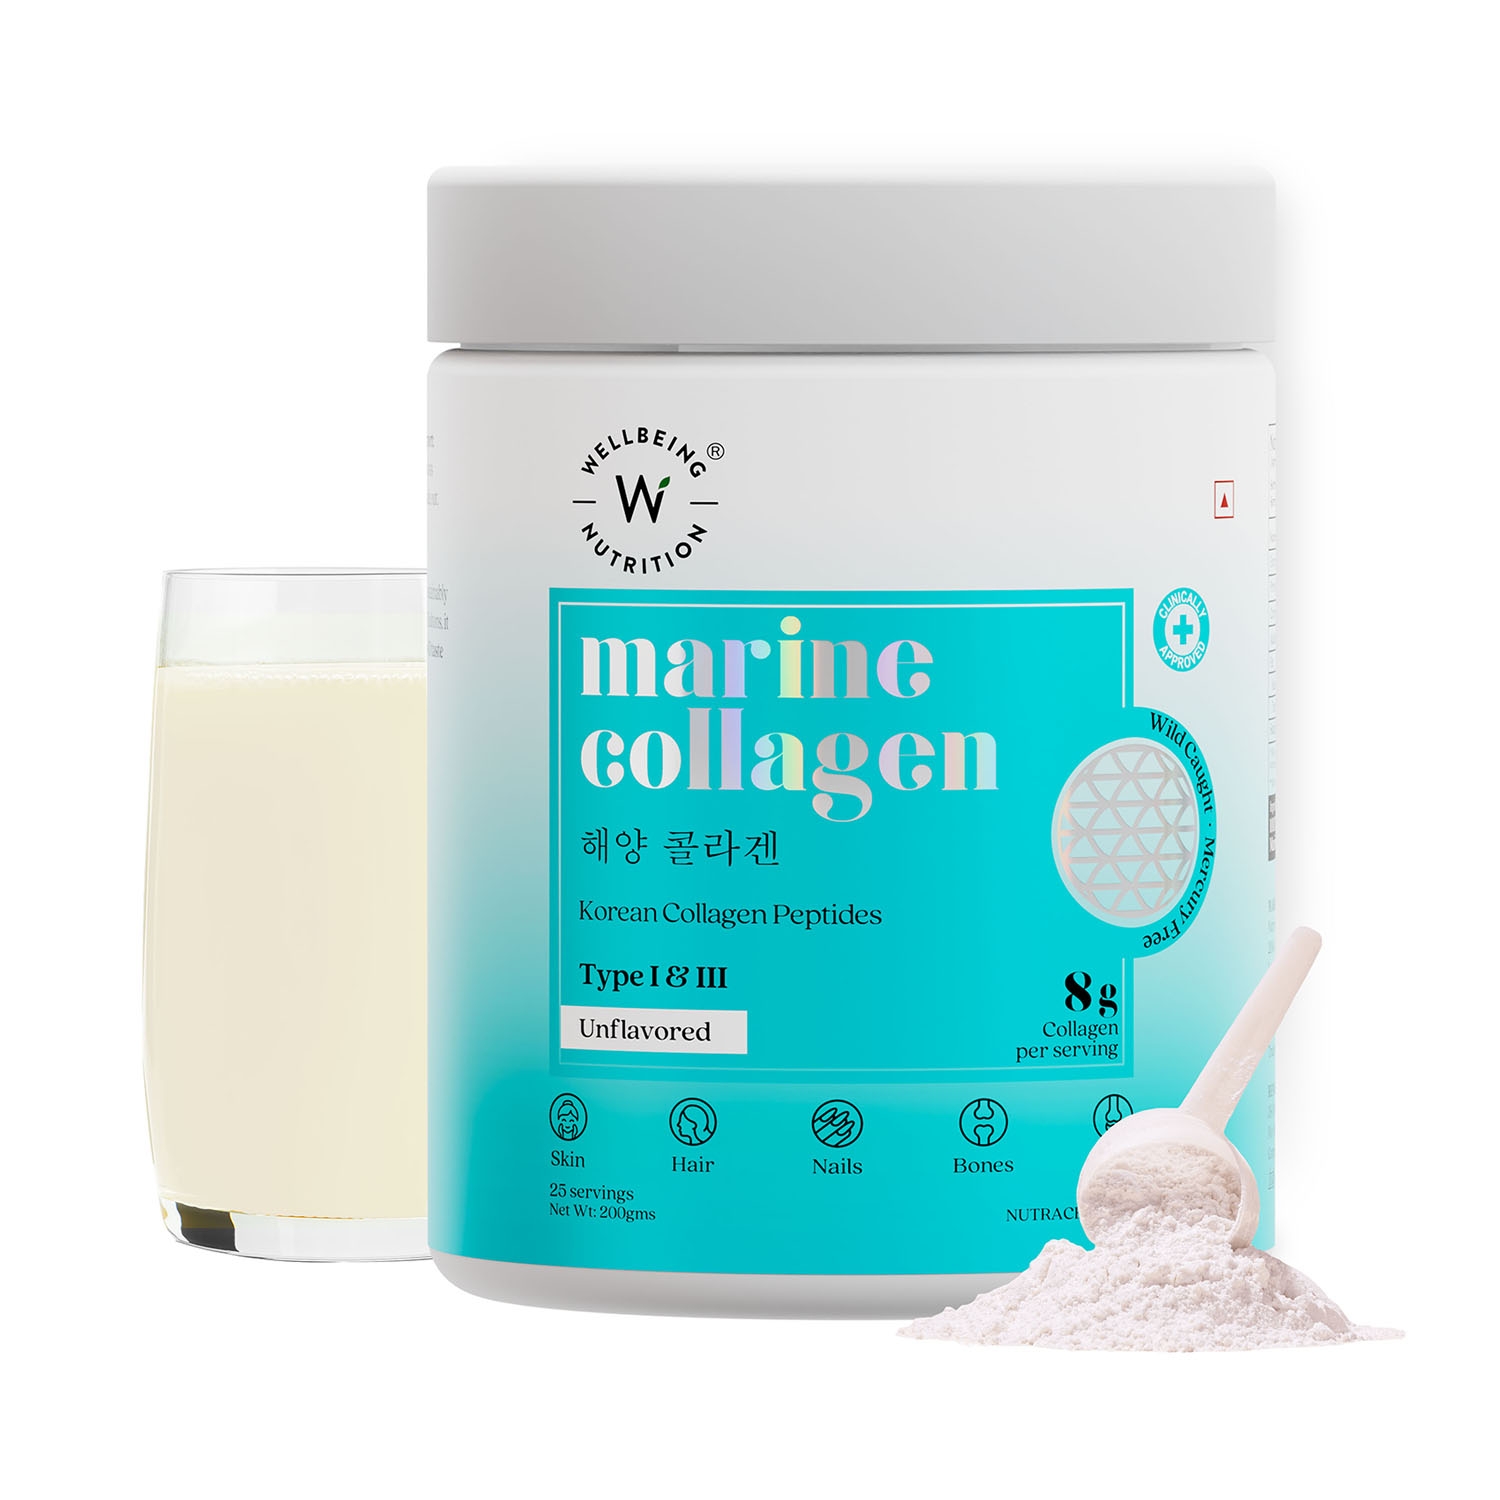 Wellbeing Nutrition | Wellbeing Nutrition Pure Korean Marine Collagen Peptides and Amino Acids for Beauty, Bone & Joints